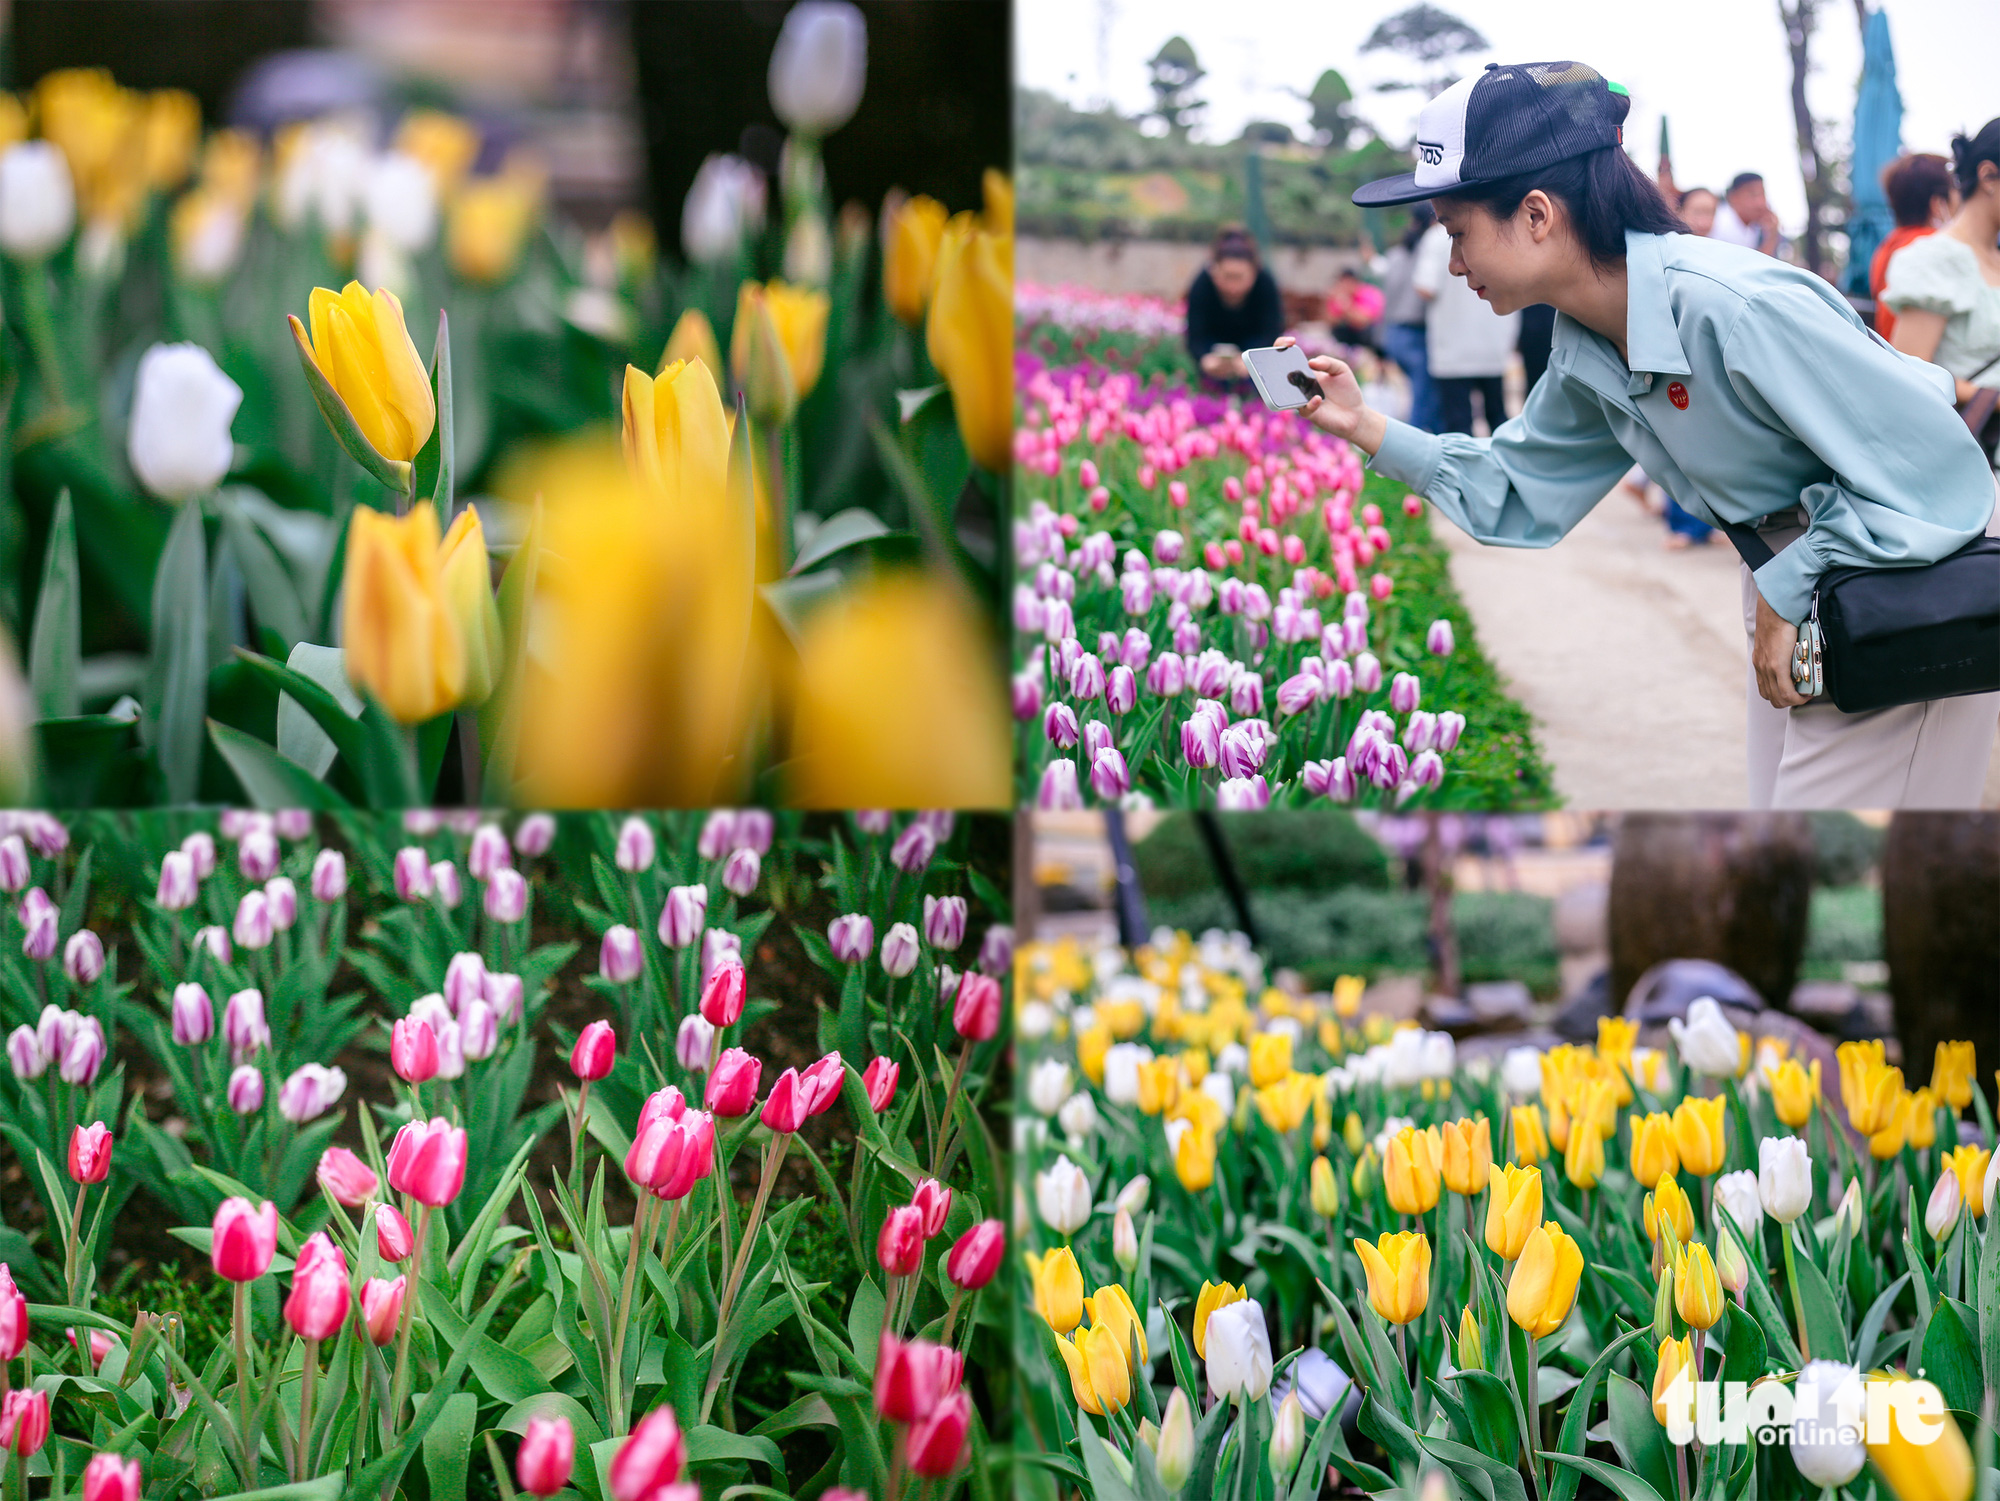 Thirty varieties of tulips show off their beauty at the Ba Den Mountain tourist site in Tay Ninh Province. Photo: Chau Tuan / Tuoi Tre